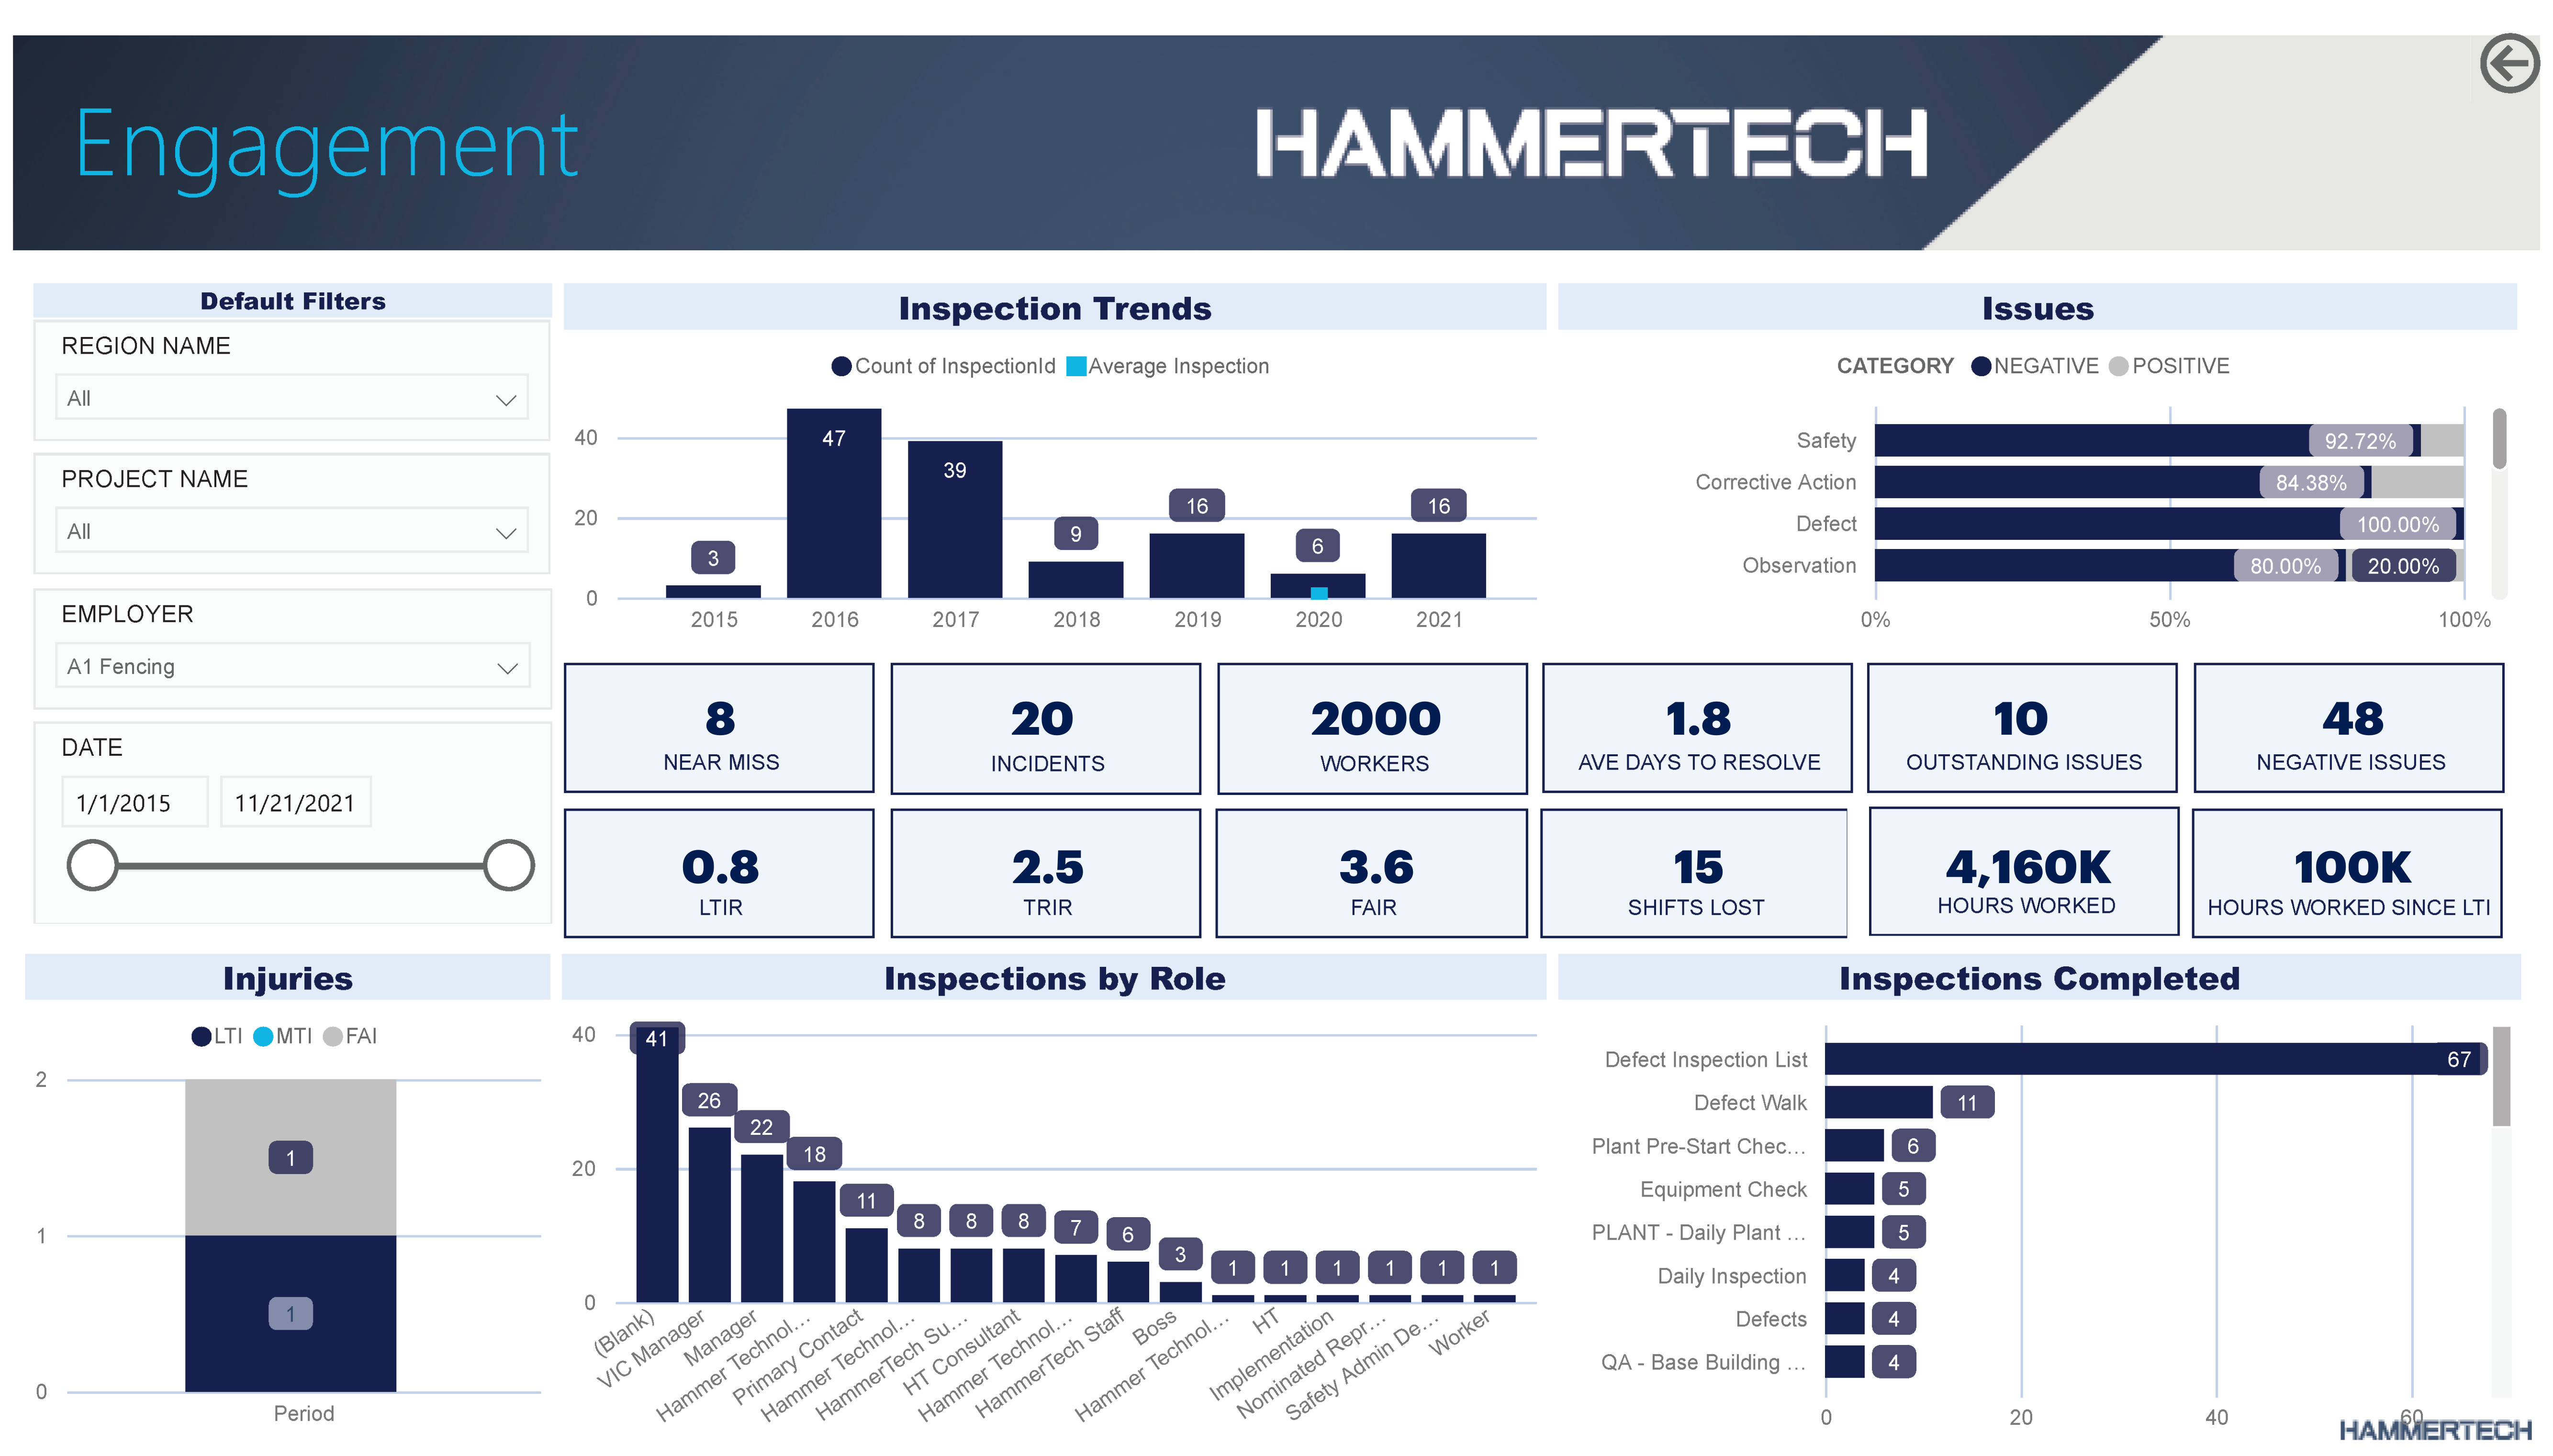 PowerBI chart depicting various aspects of proactive prequalification within the HammerTech EHS software suite. This chart visualizes inspection trends, issues, injuries, inspections by rate, and inspections completed over time. From a finance perspective, these critical metrics offer invaluable insights into potential risks, operational costs, and financial liabilities. By tracking these elements, HammerTech enables financial executives to maintain a proactive approach in mitigating risks, optimizing resource allocation, reducing insurance costs, and improving profitability in their construction projects.